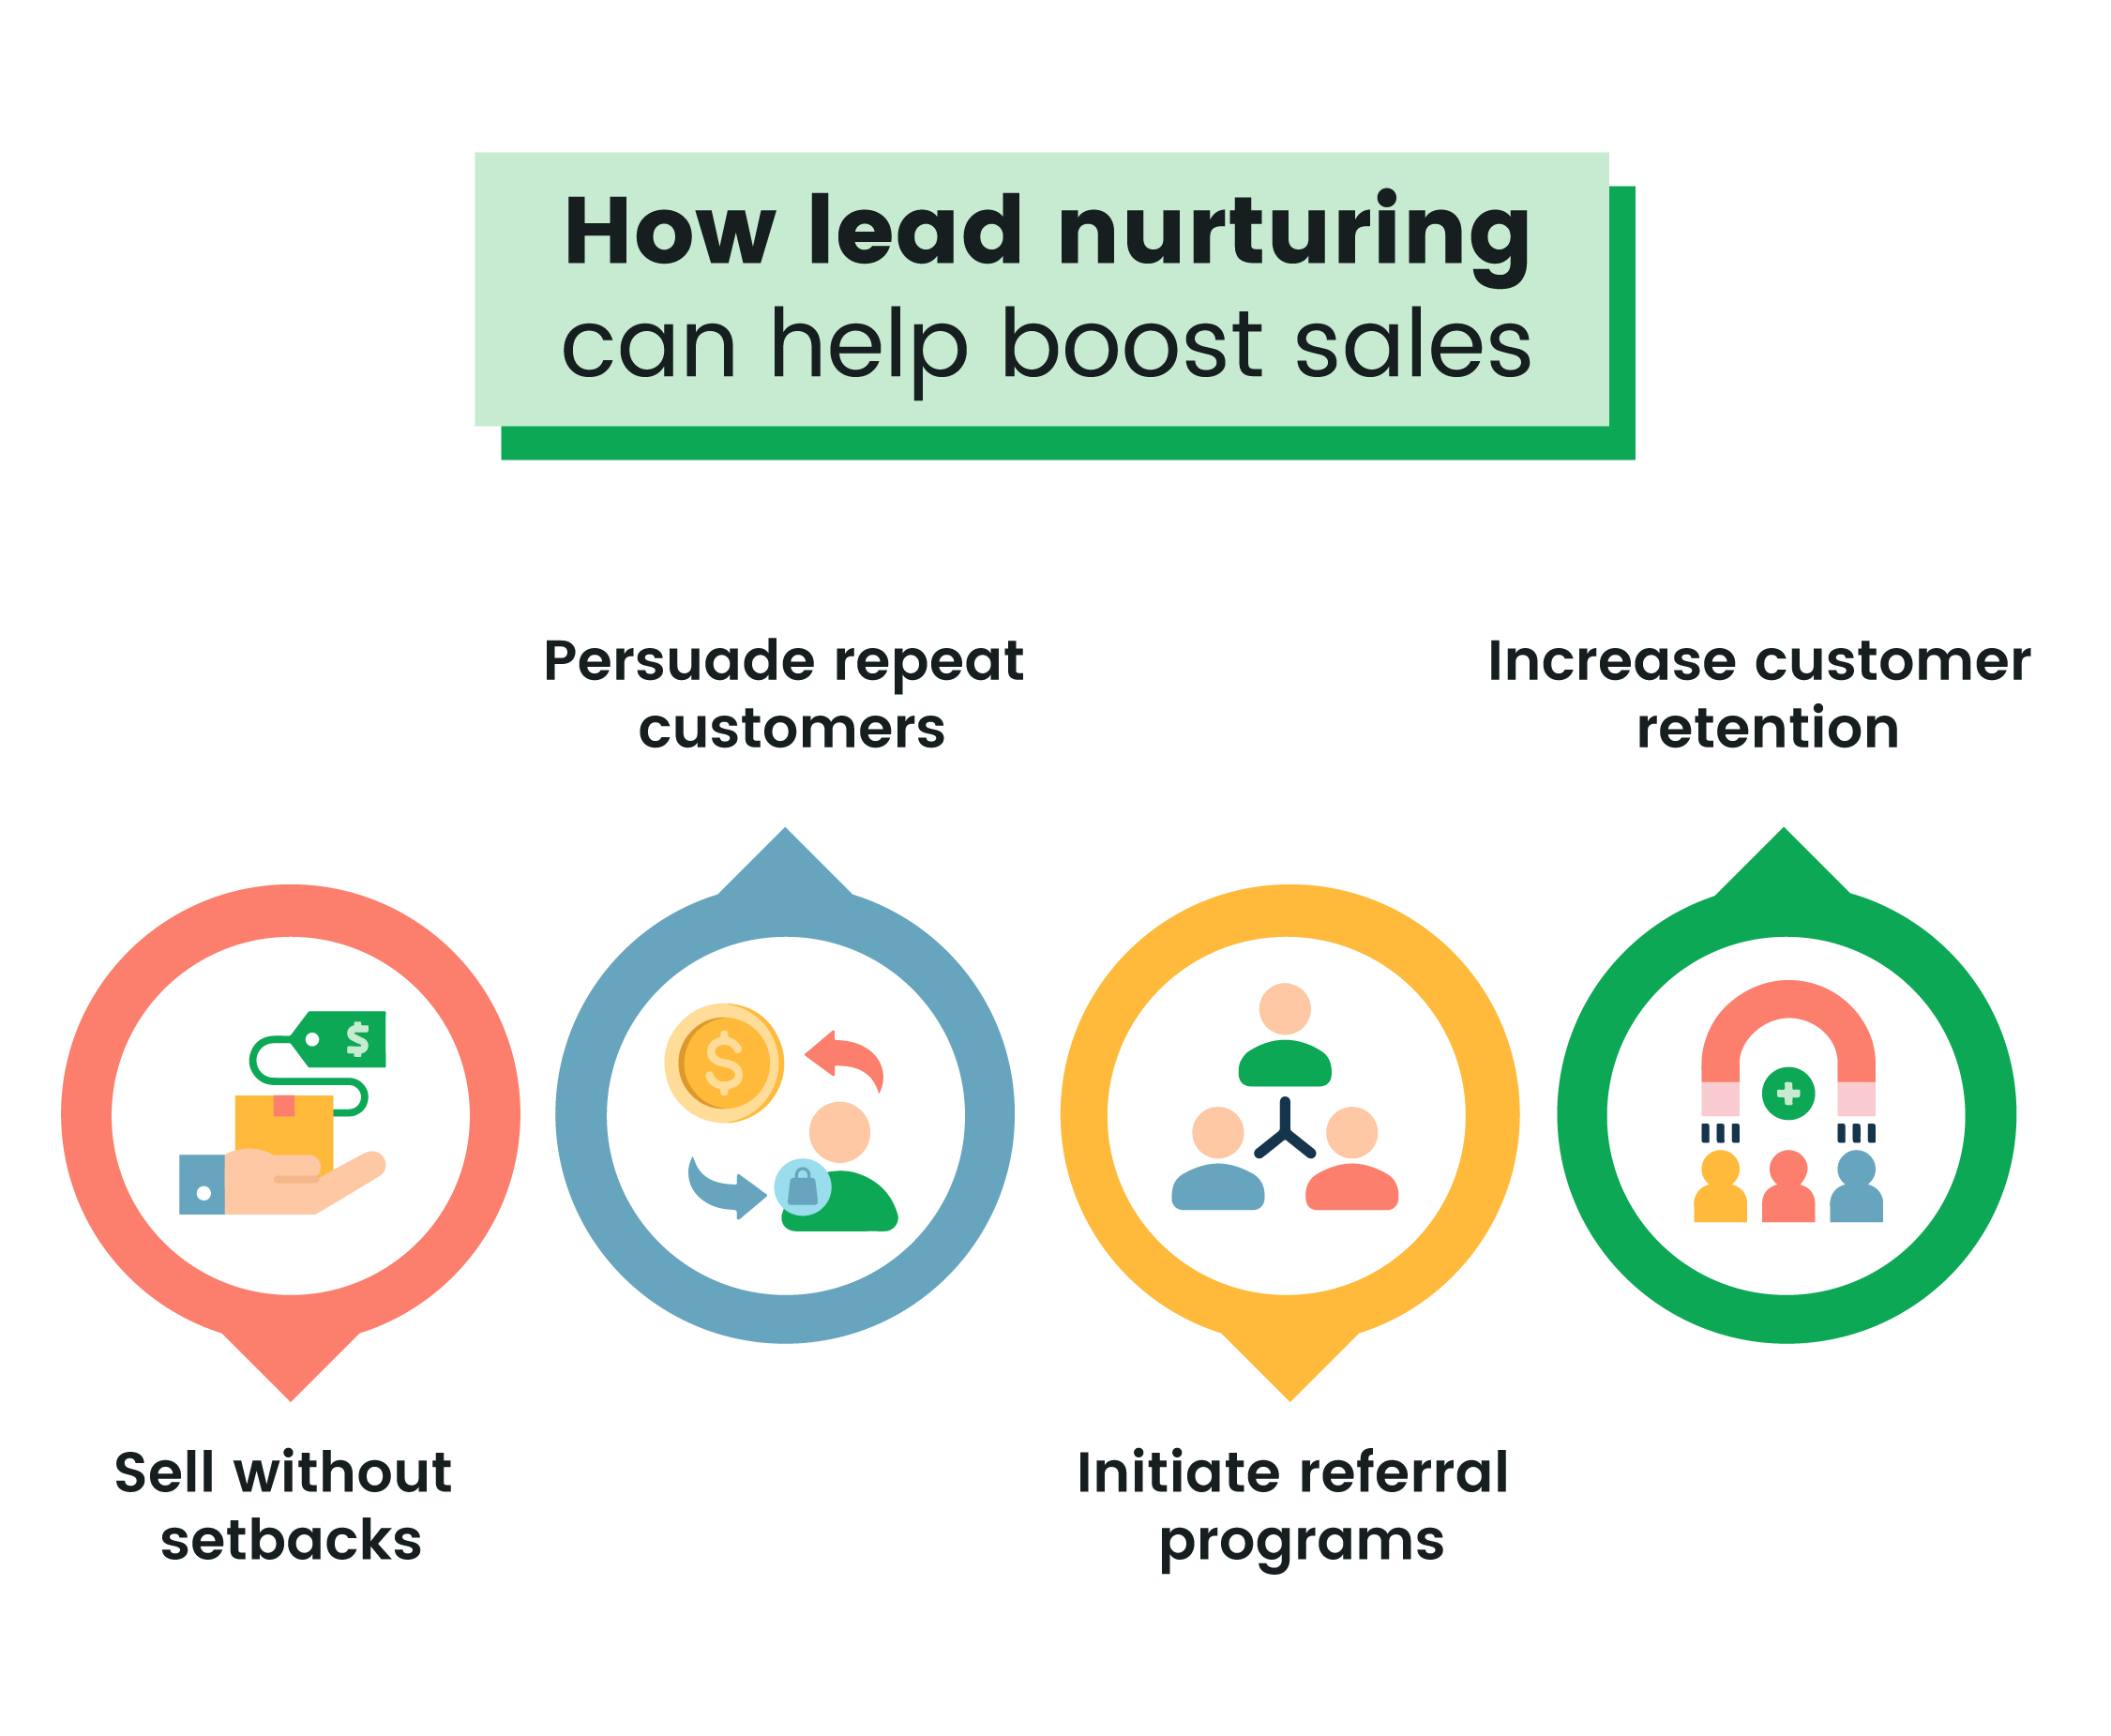 How lead nurturing boost sales infographic